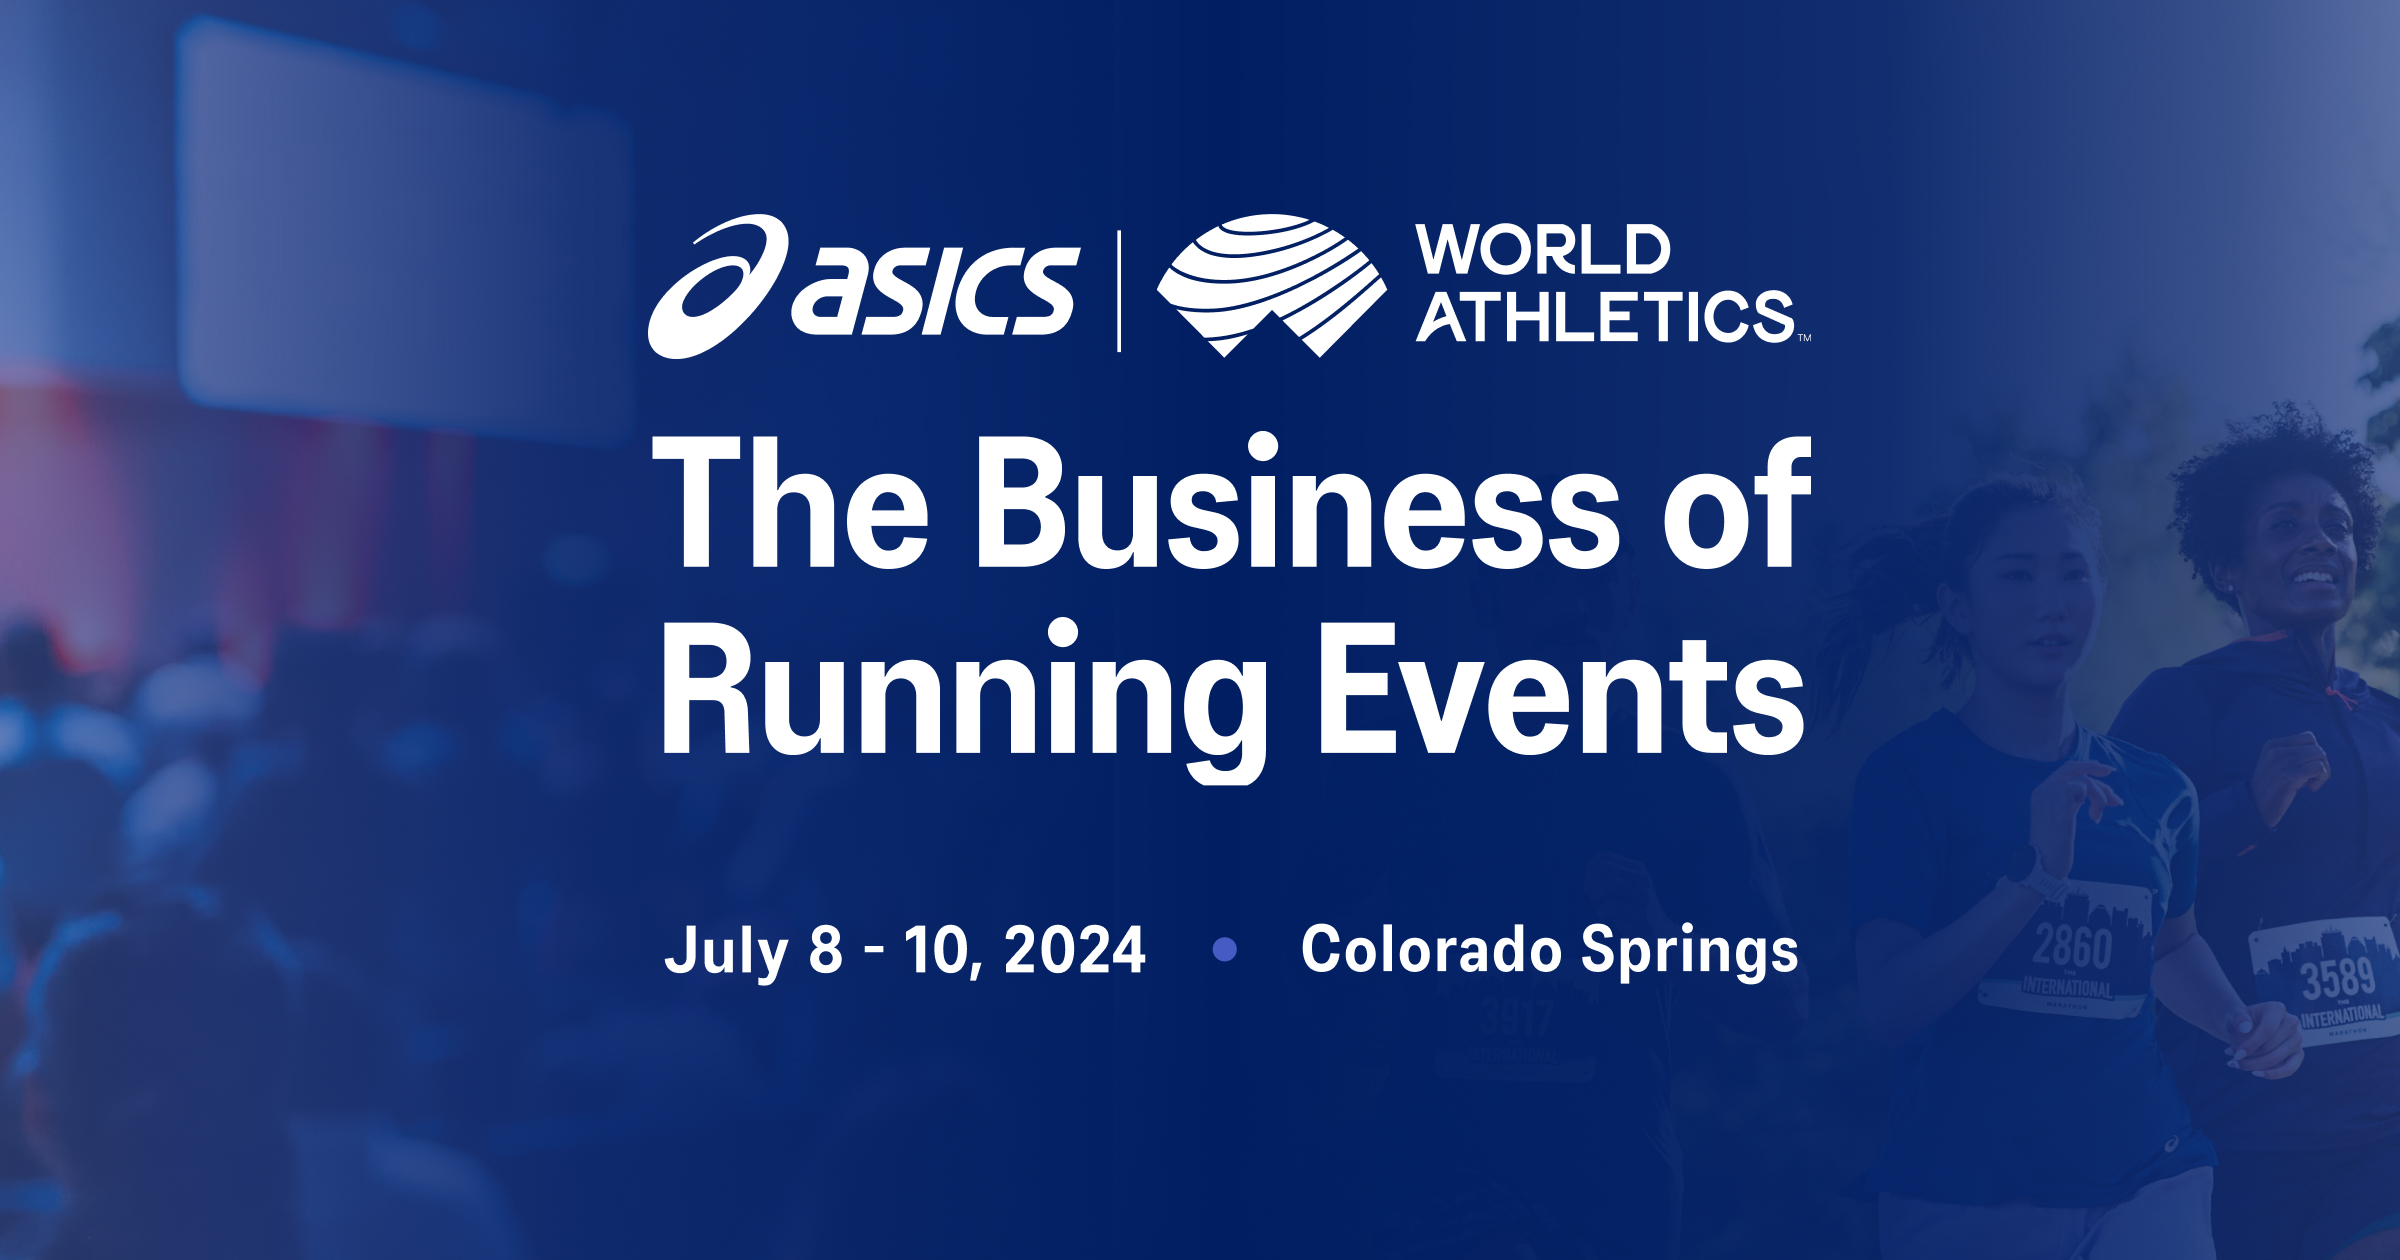 ASICS & World Athletics Announce New Conference: The Business of